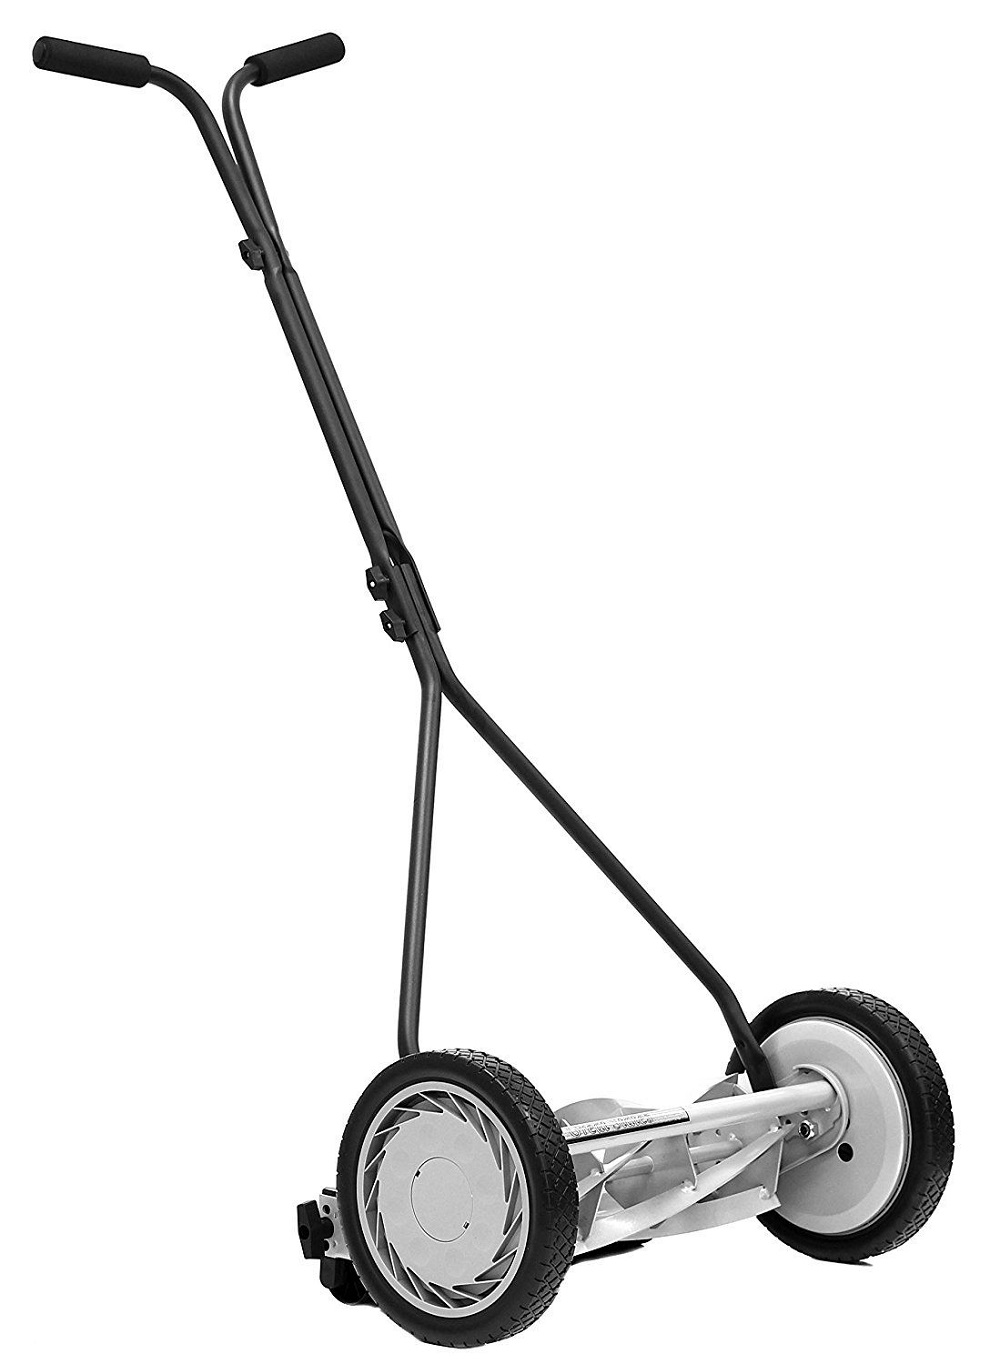 lw1-1 Small lawnmower options you can buy online